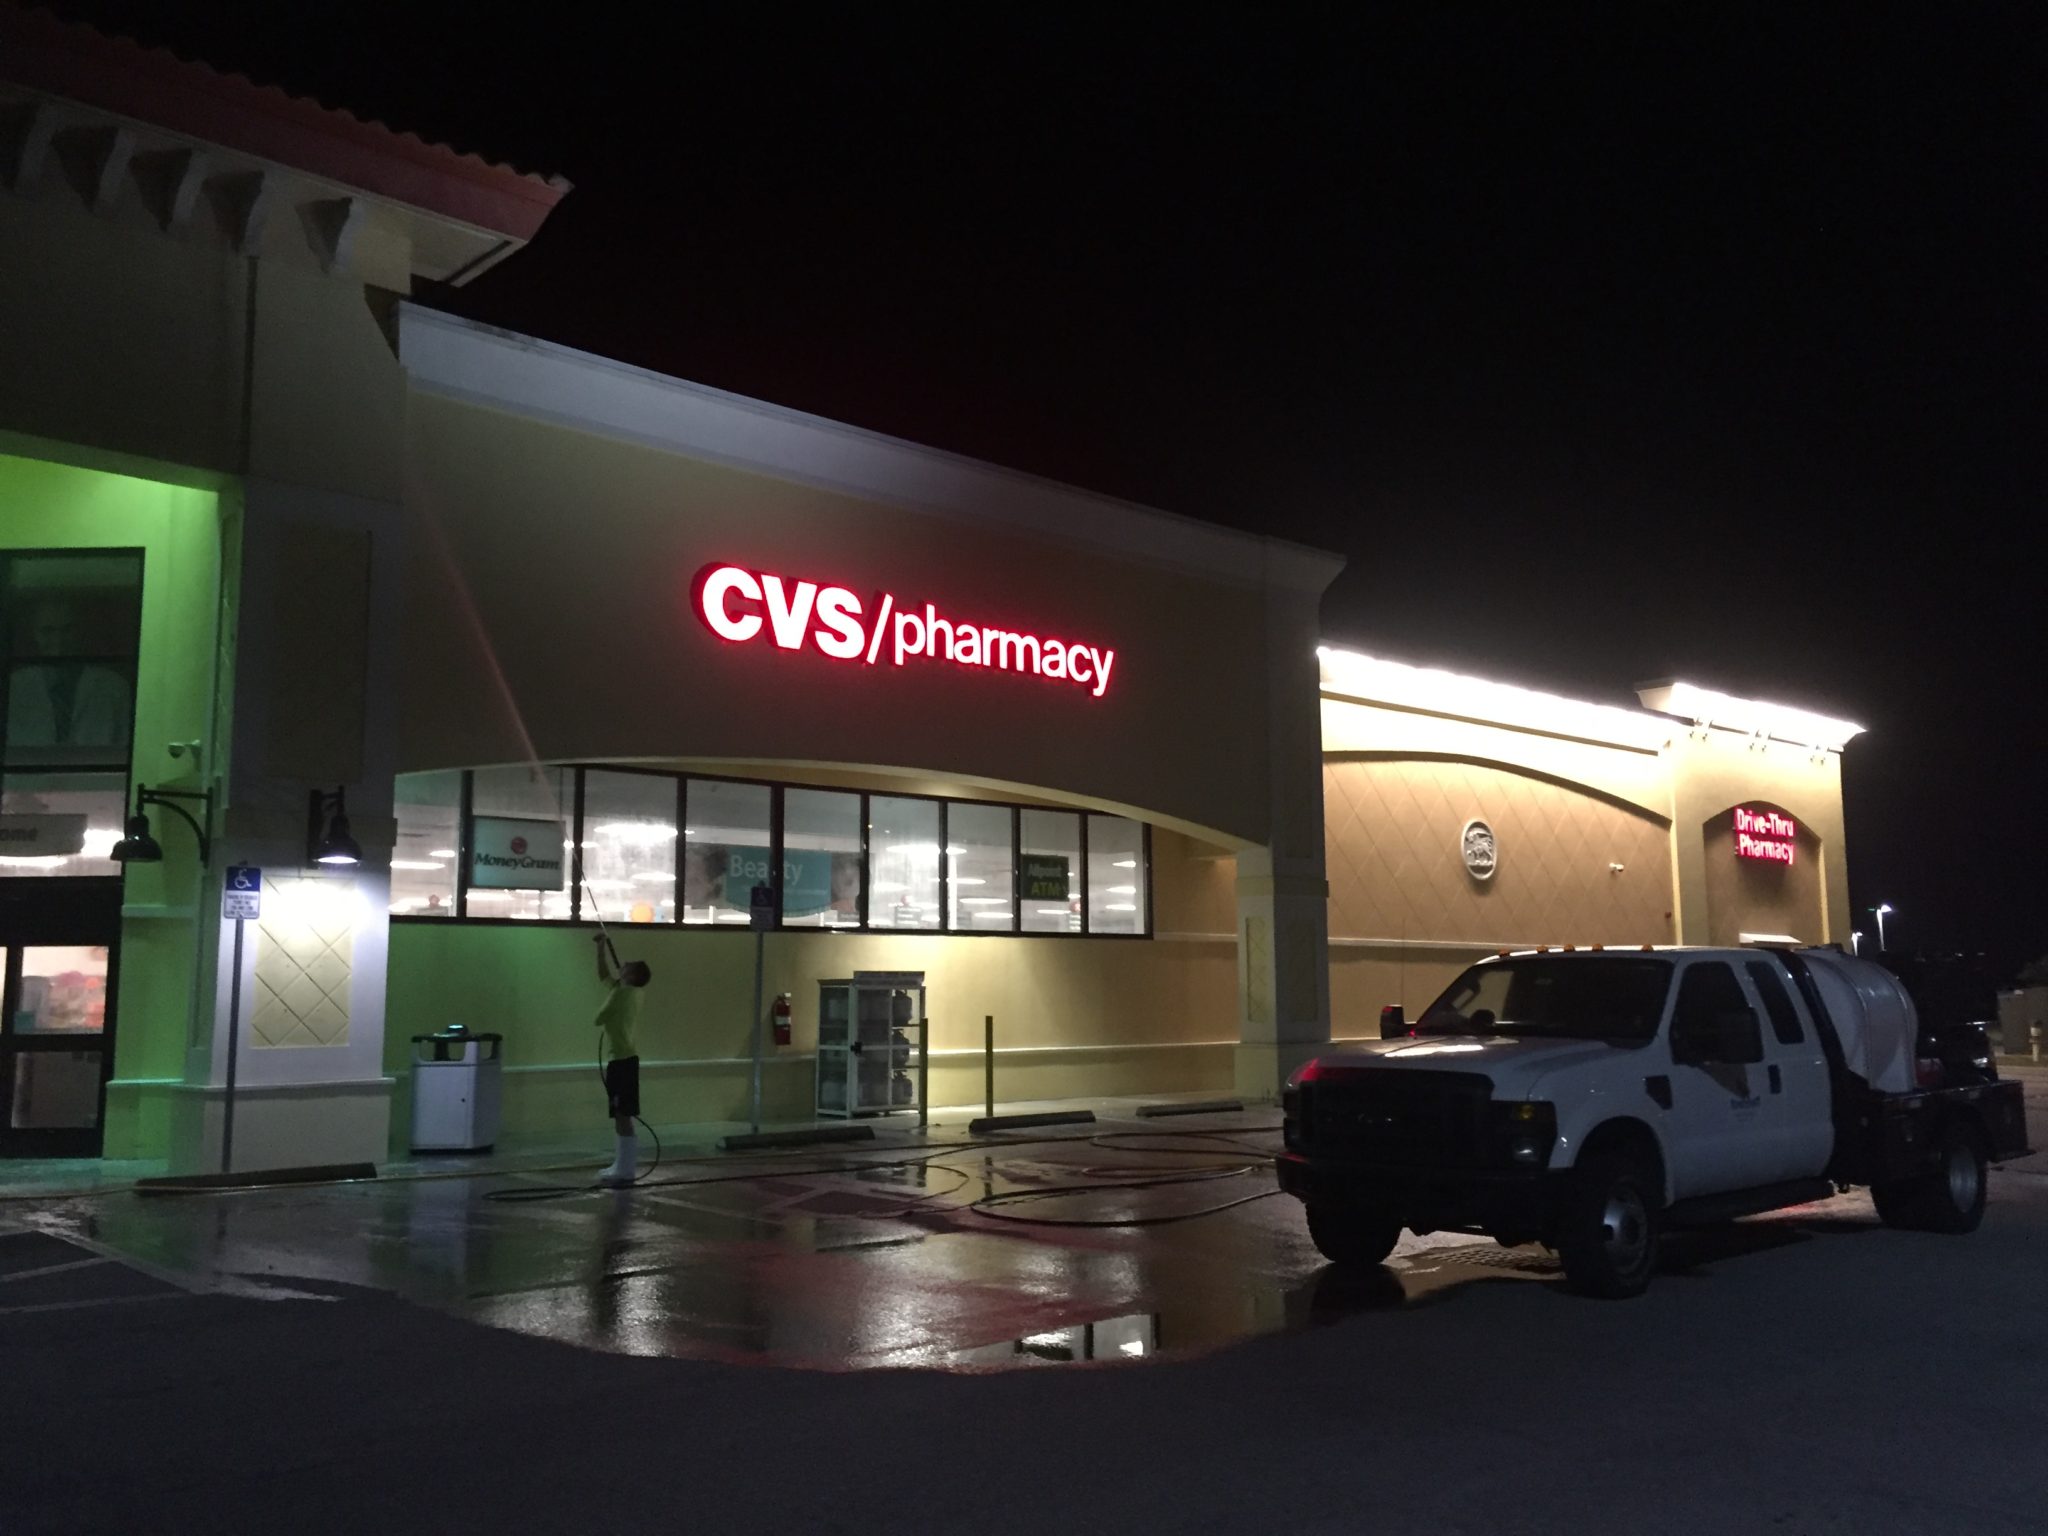 Suncoast Roof Cleaning a CVS in Sarasota